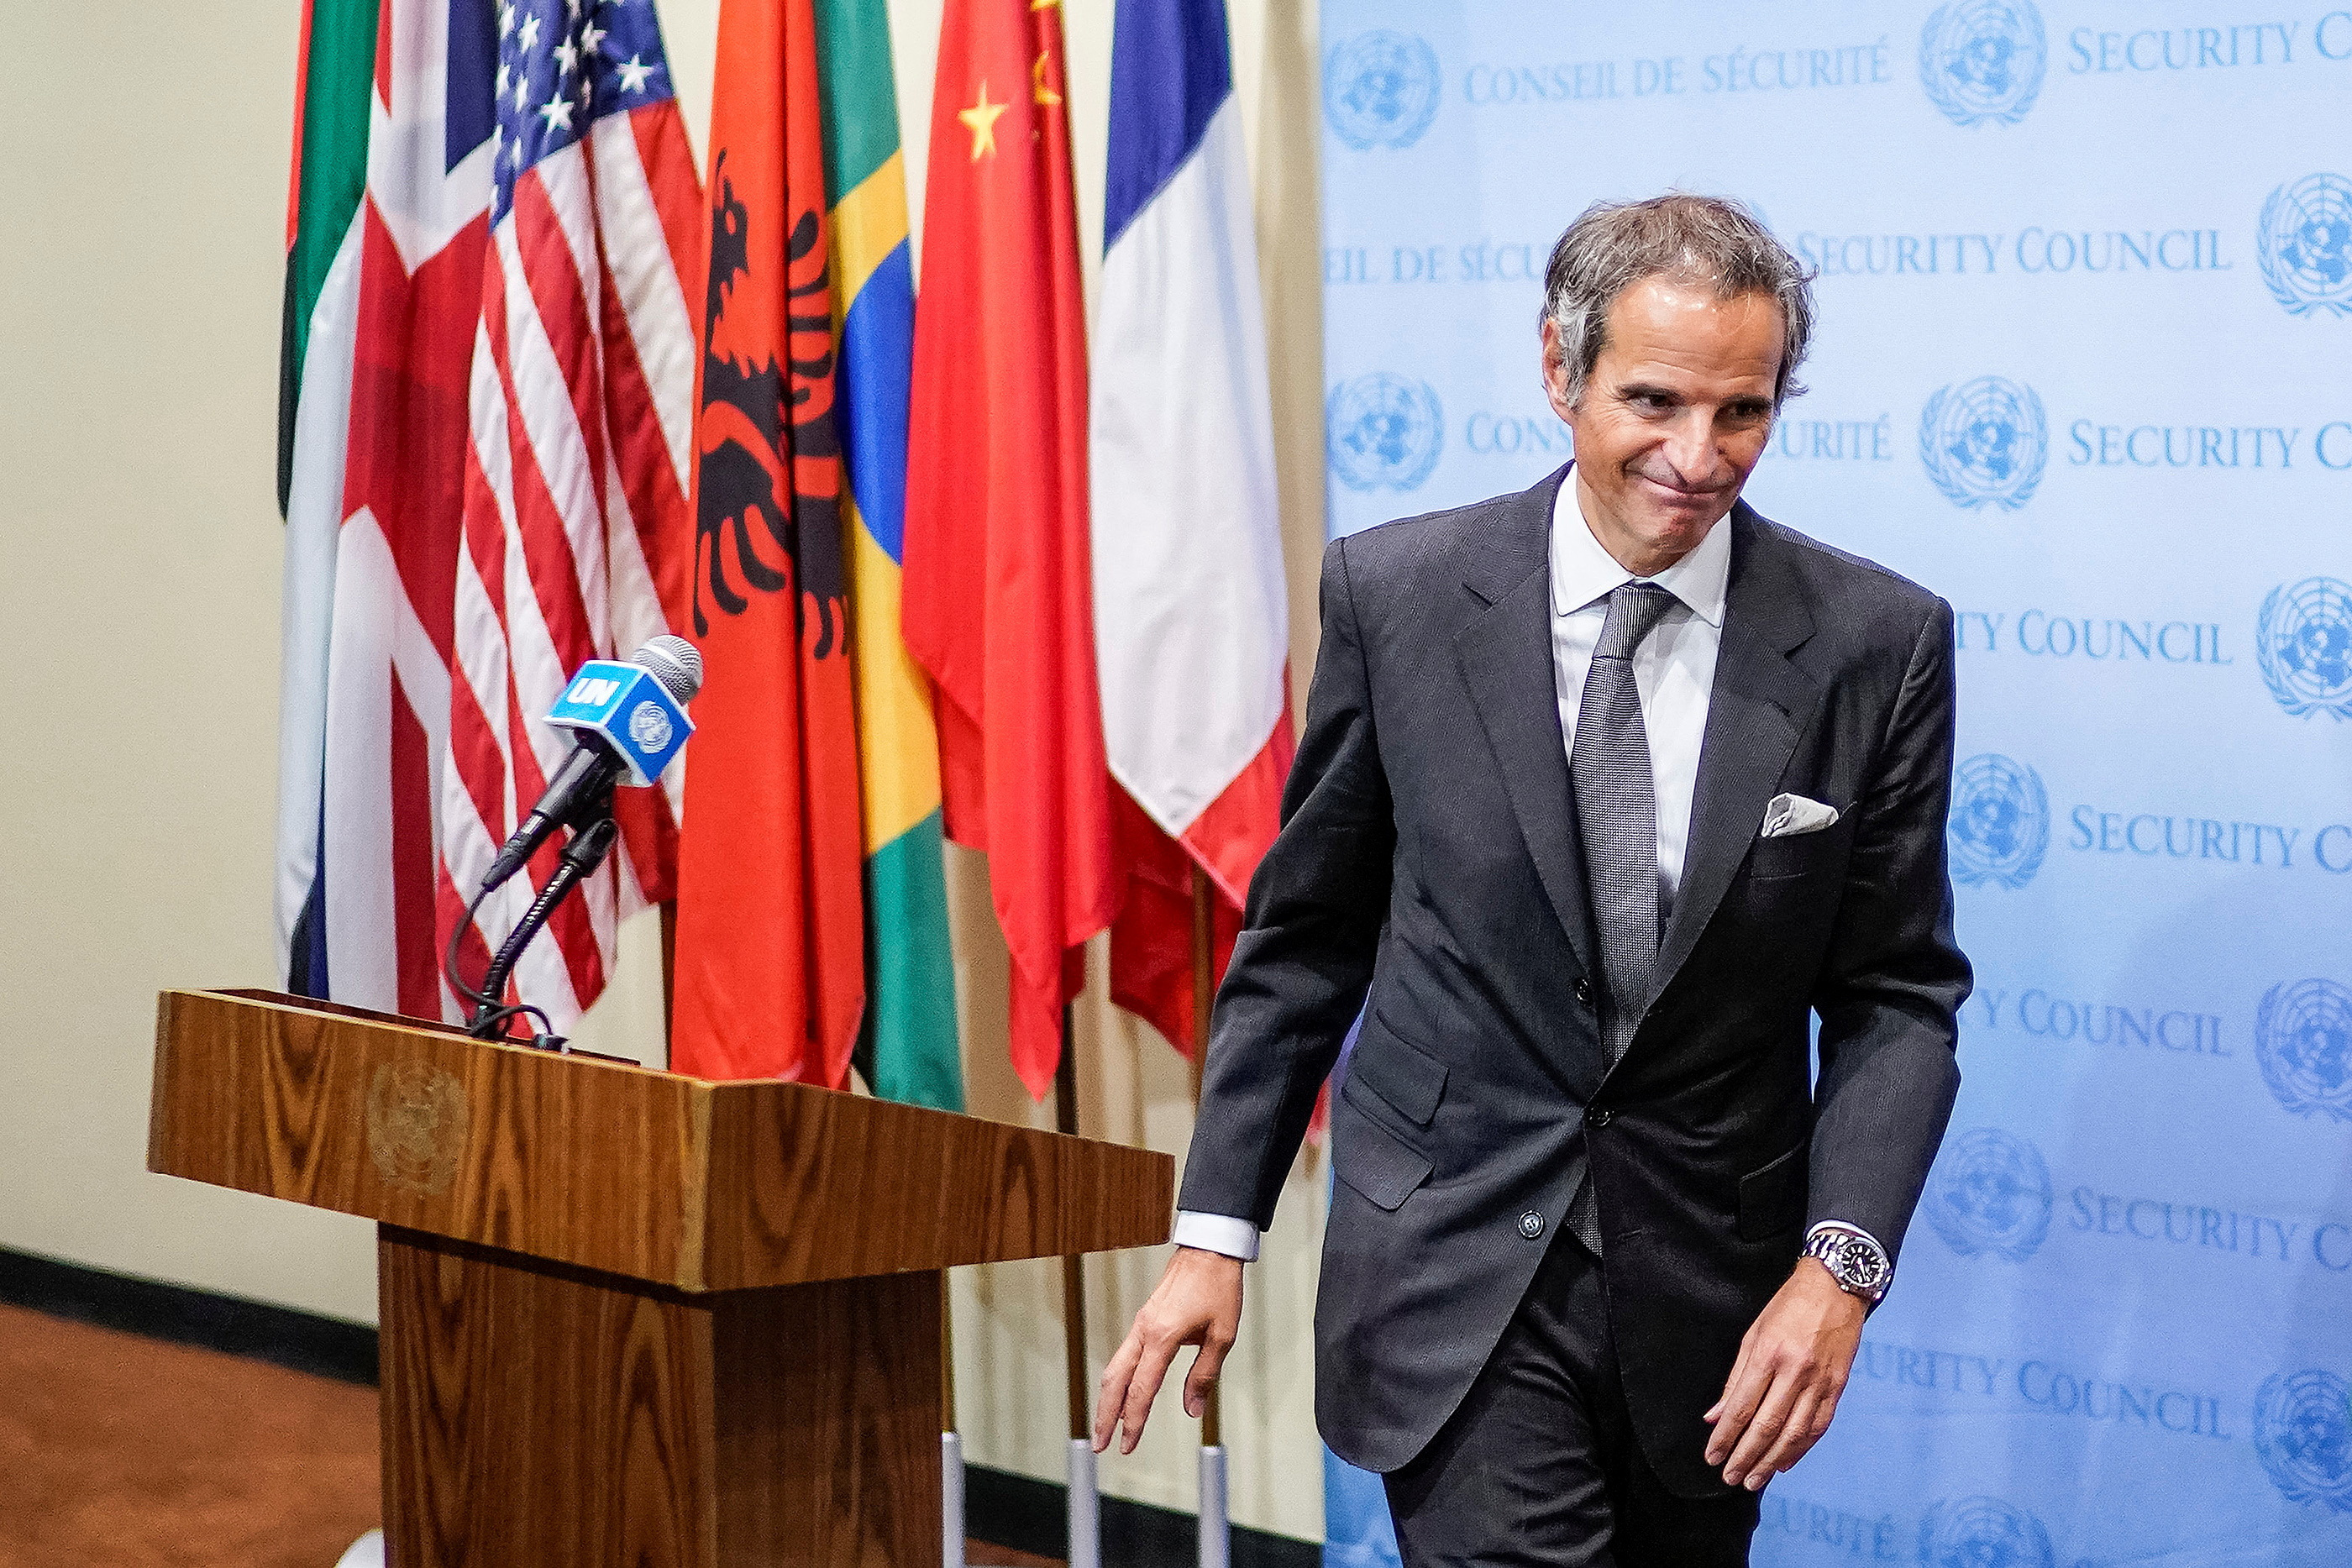 The Director General of the International Atomic Energy Agency (IAEA), Rafael Mariano Grossi exits the podium after giving his remarks to the media at the United Nations headquarters in New York